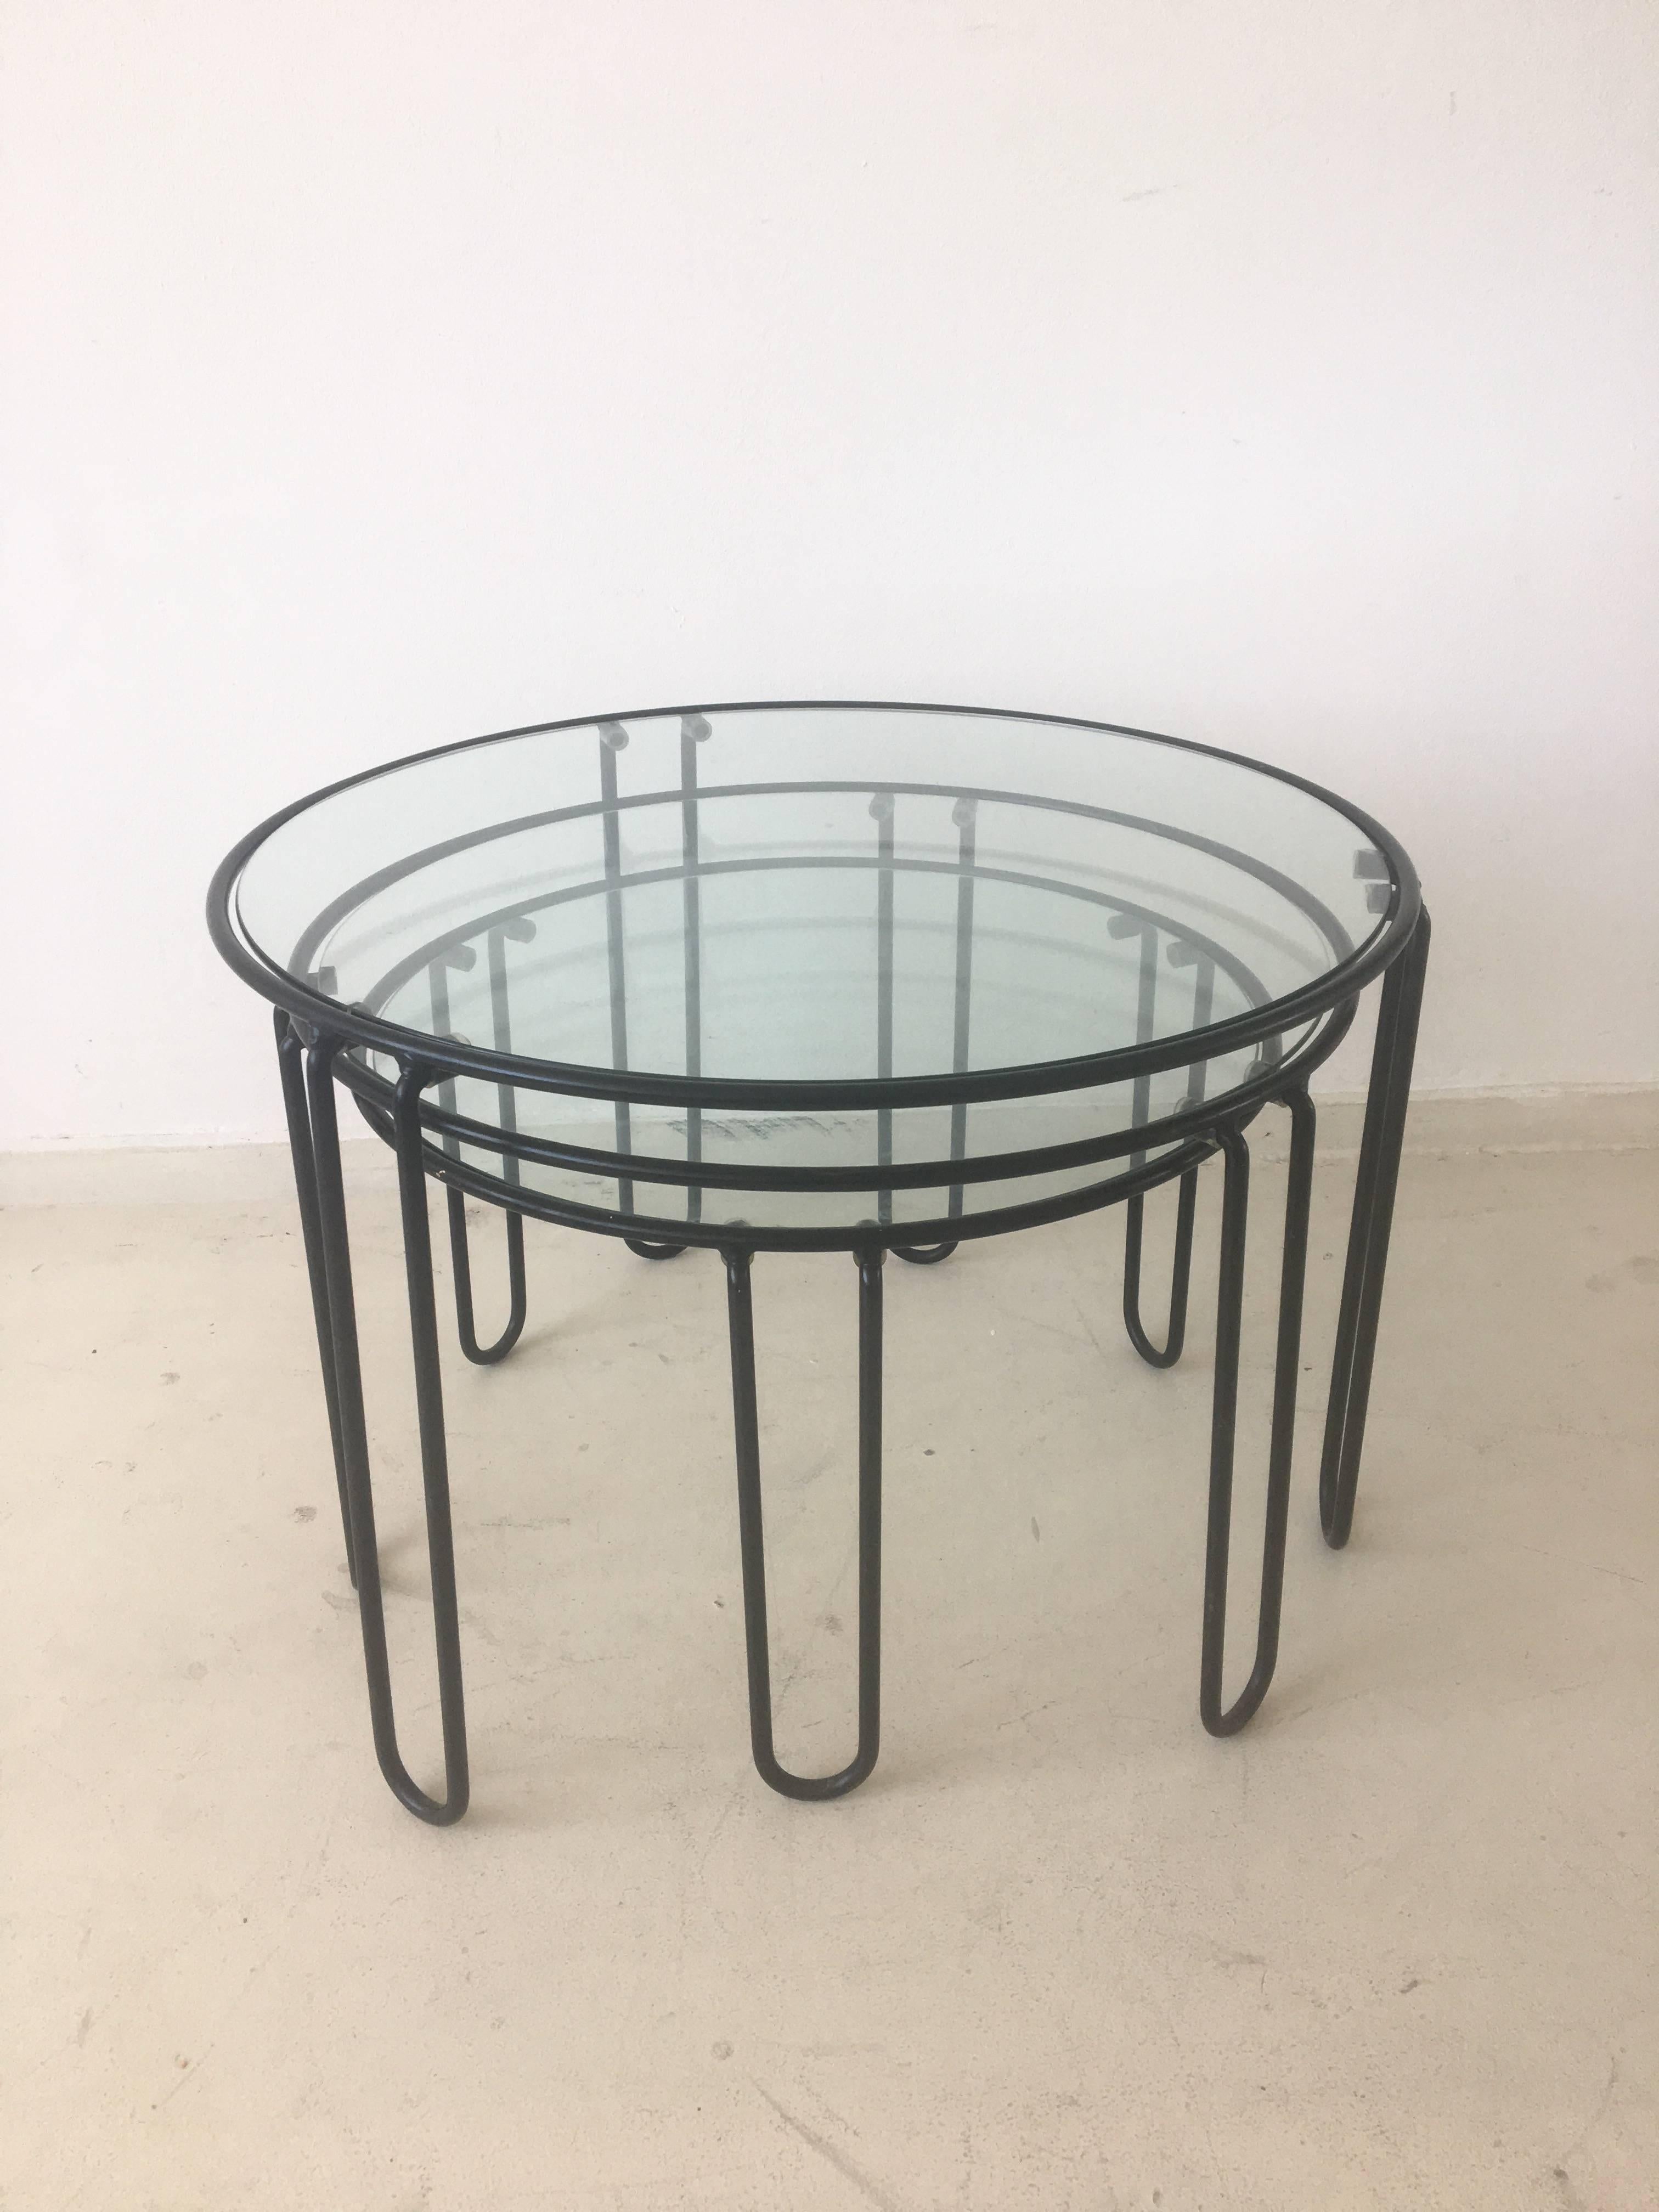 These coffee tables are stackable but can also be used next to each other. Some resemblance with designs of Arnold Buena de Mesquita and Sapority. They feature a black metal frame with a glass top. They remain in good condition with some signs of